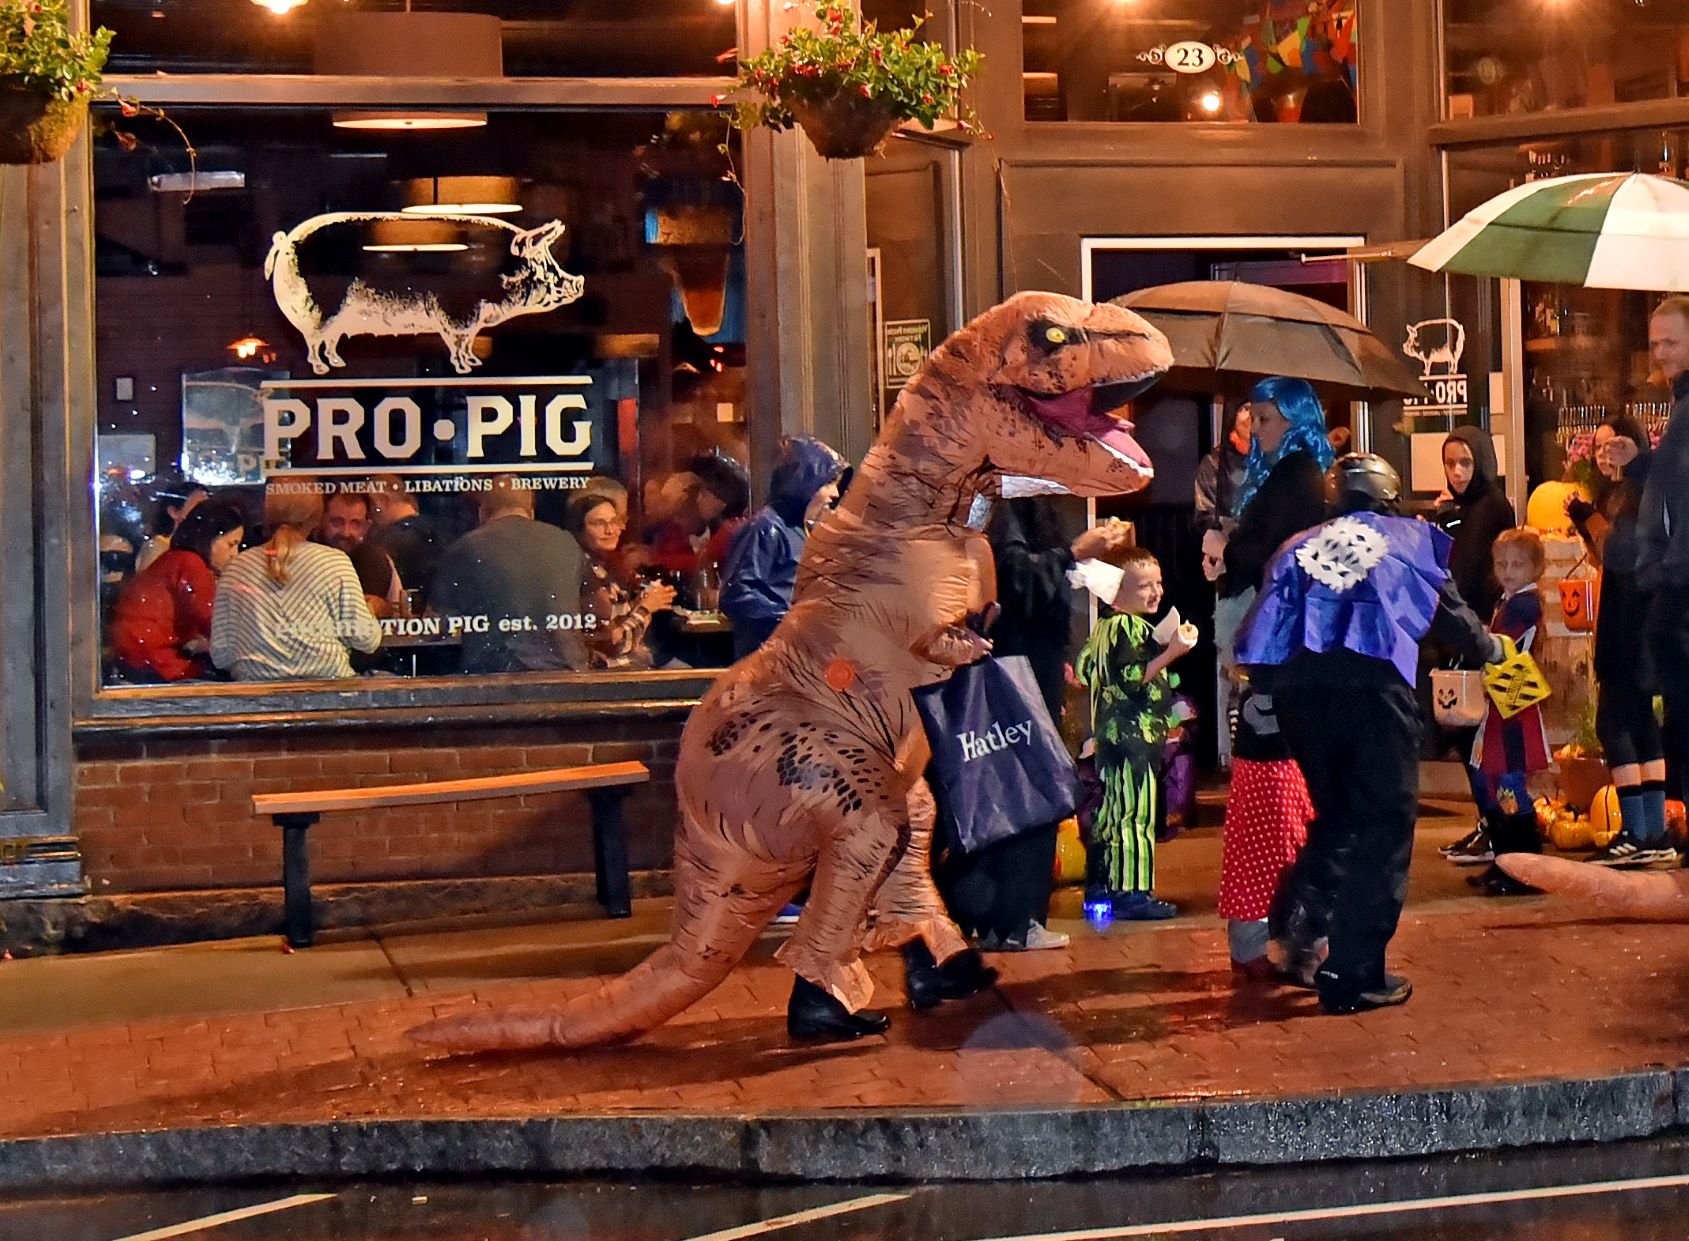  Nothing unusual to see here on Halloween night in downtown Waterbury. Photo by Gordon Miller 